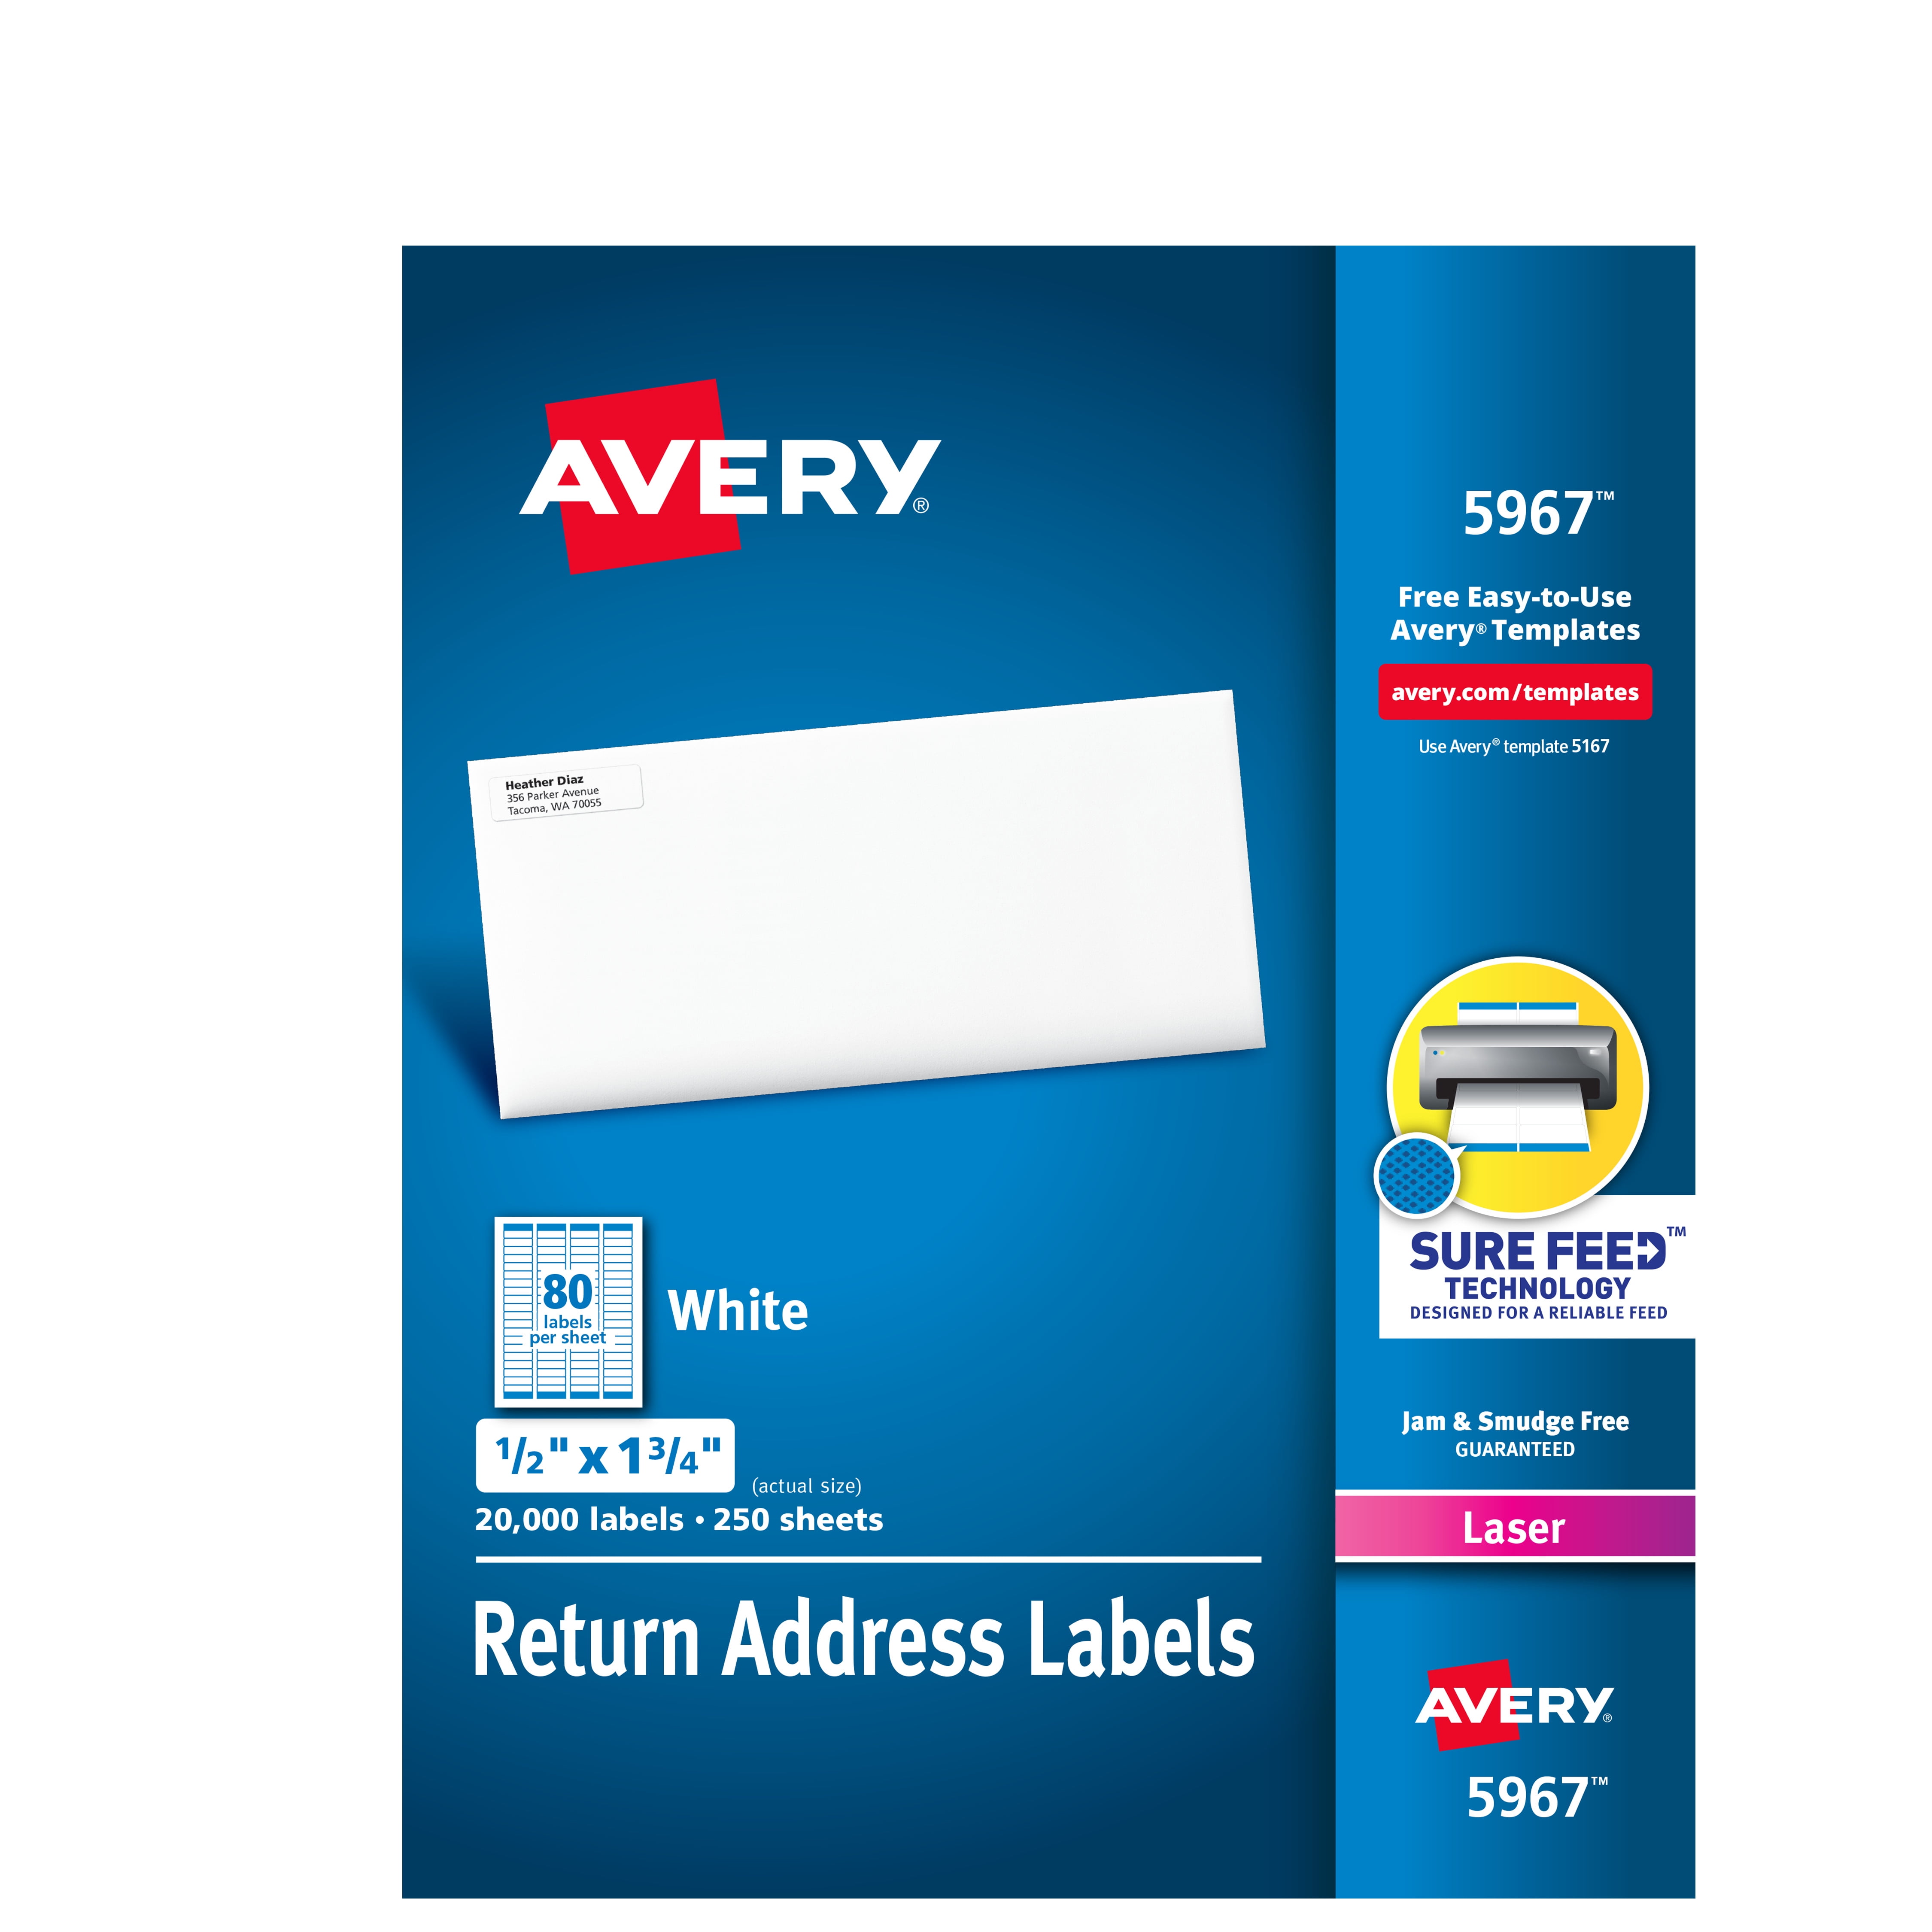 avery-template-for-mac-5260-hoolilaunch